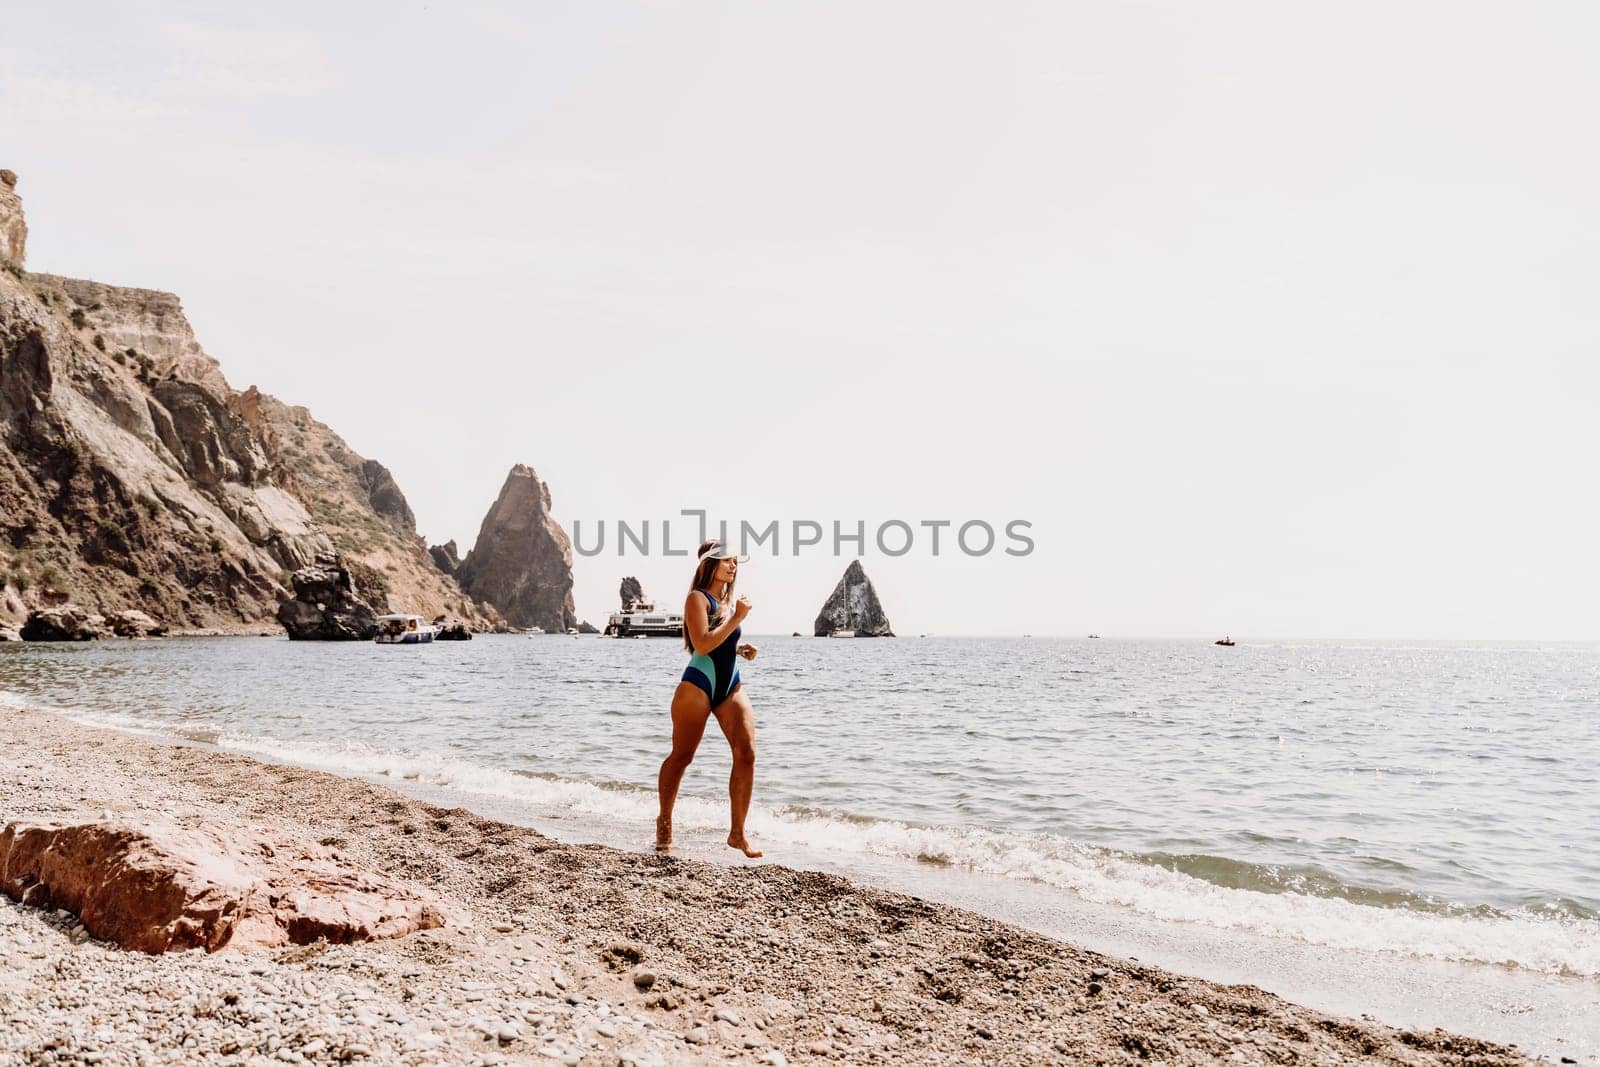 Woman beach vacation photo. A happy tourist in a blue bikini enjoying the scenic view of the sea and volcanic mountains while taking pictures to capture the memories of her travel adventure